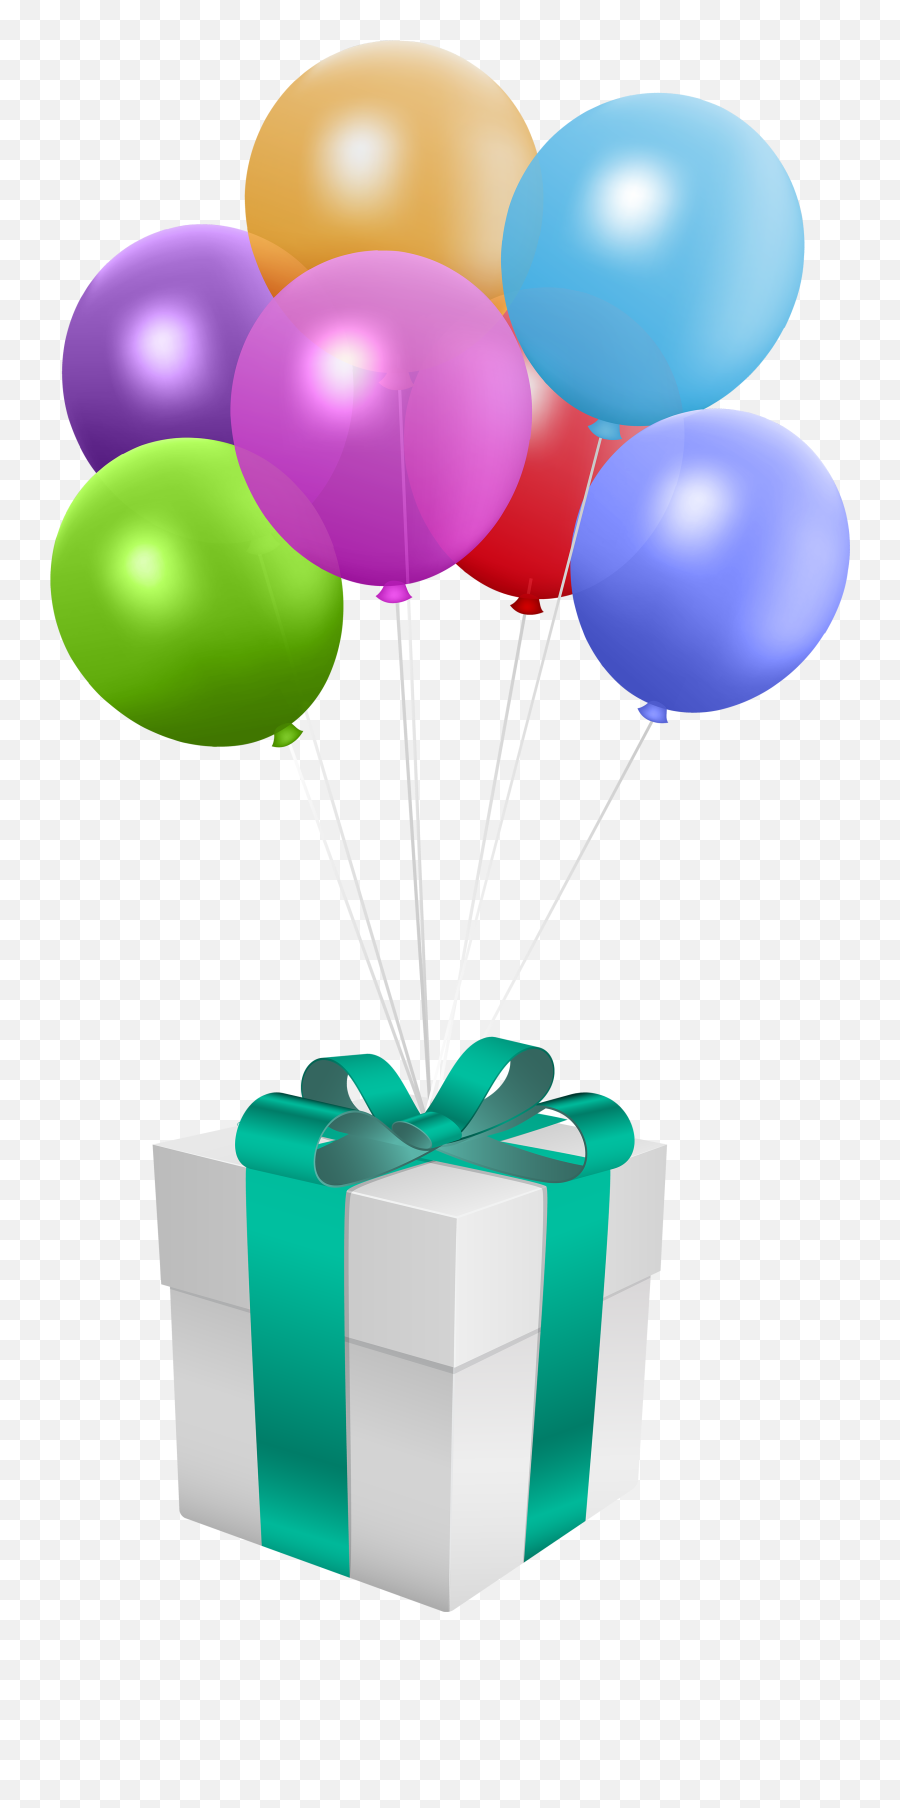 Download Gift With Balloon Birthday - Birthday Gifts Or Balloons Emoji,Birthday Balloons Png